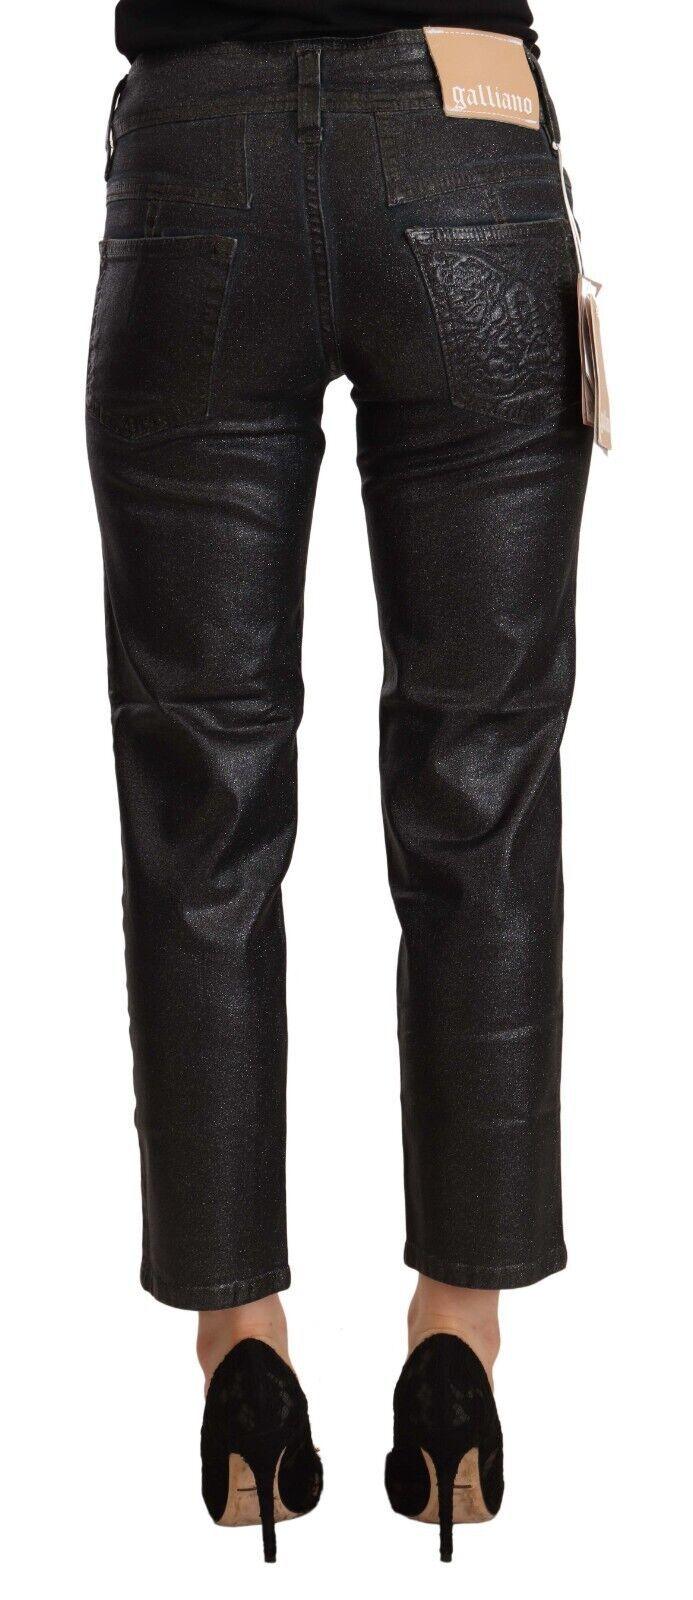 John Galliano Black Glittered Mid Waist Cotton Cropped Pants - Designed by John Galliano Available to Buy at a Discounted Price on Moon Behind The Hill Online Designer Discount Store